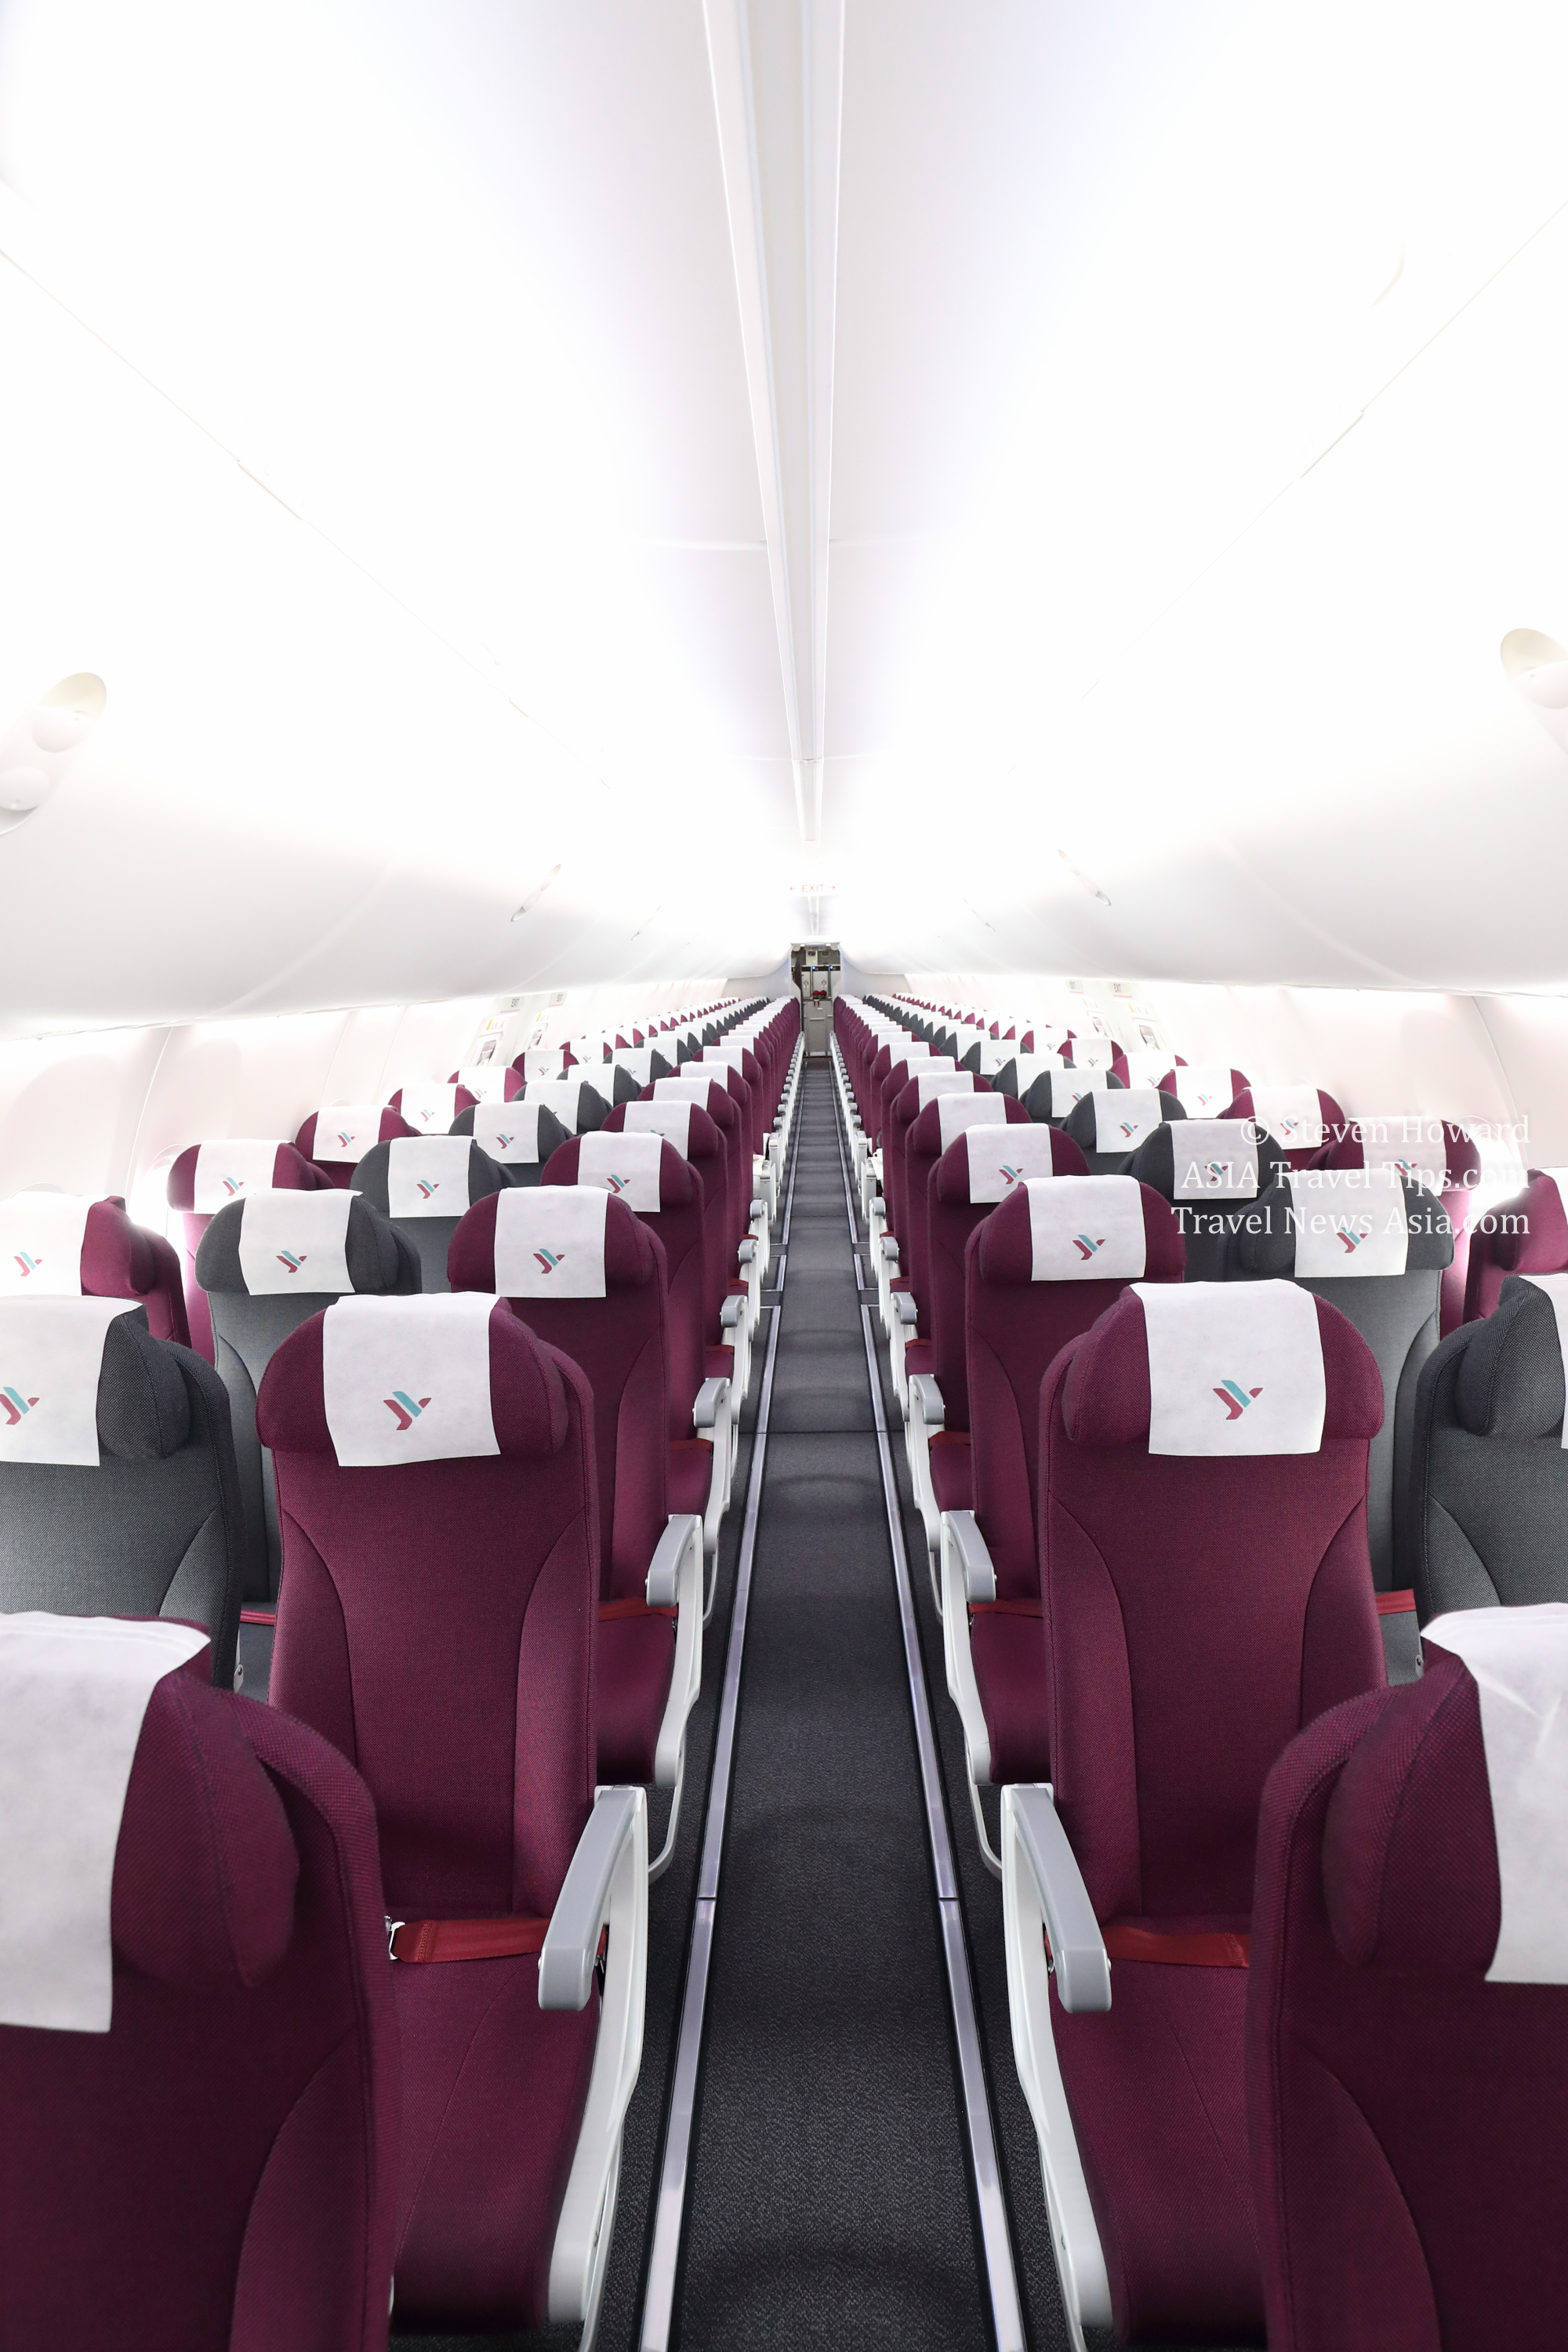 On board an Air Italy Boeing 737 MAX 8. Picture by Steven Howard of TravelNewsAsia.com Click to enlarge.